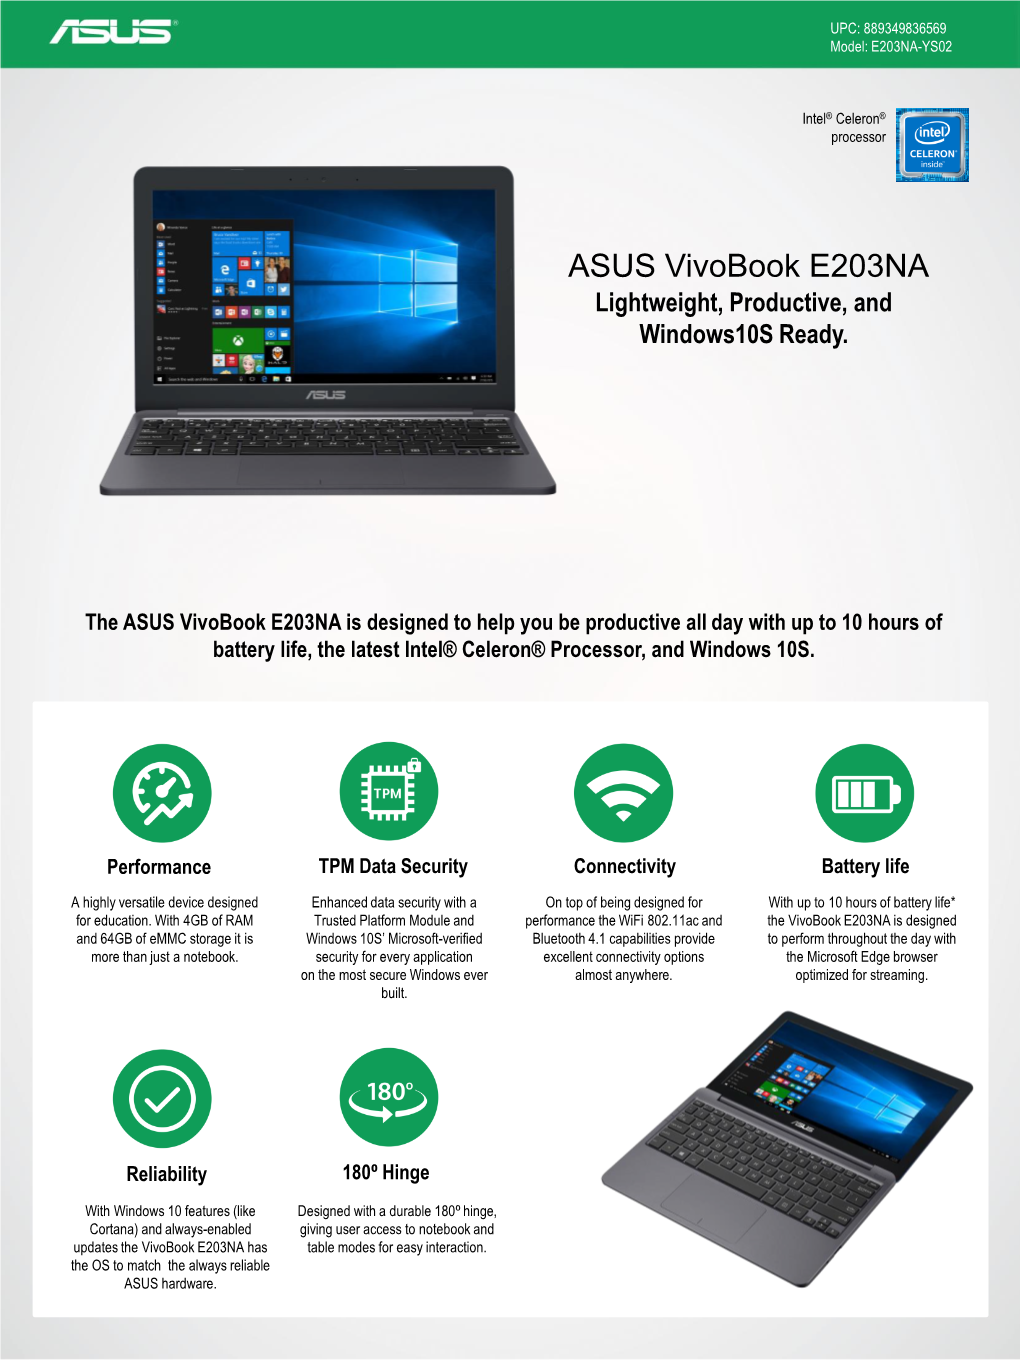 ASUS Vivobook E203NA Lightweight, Productive, and Windows10s Ready